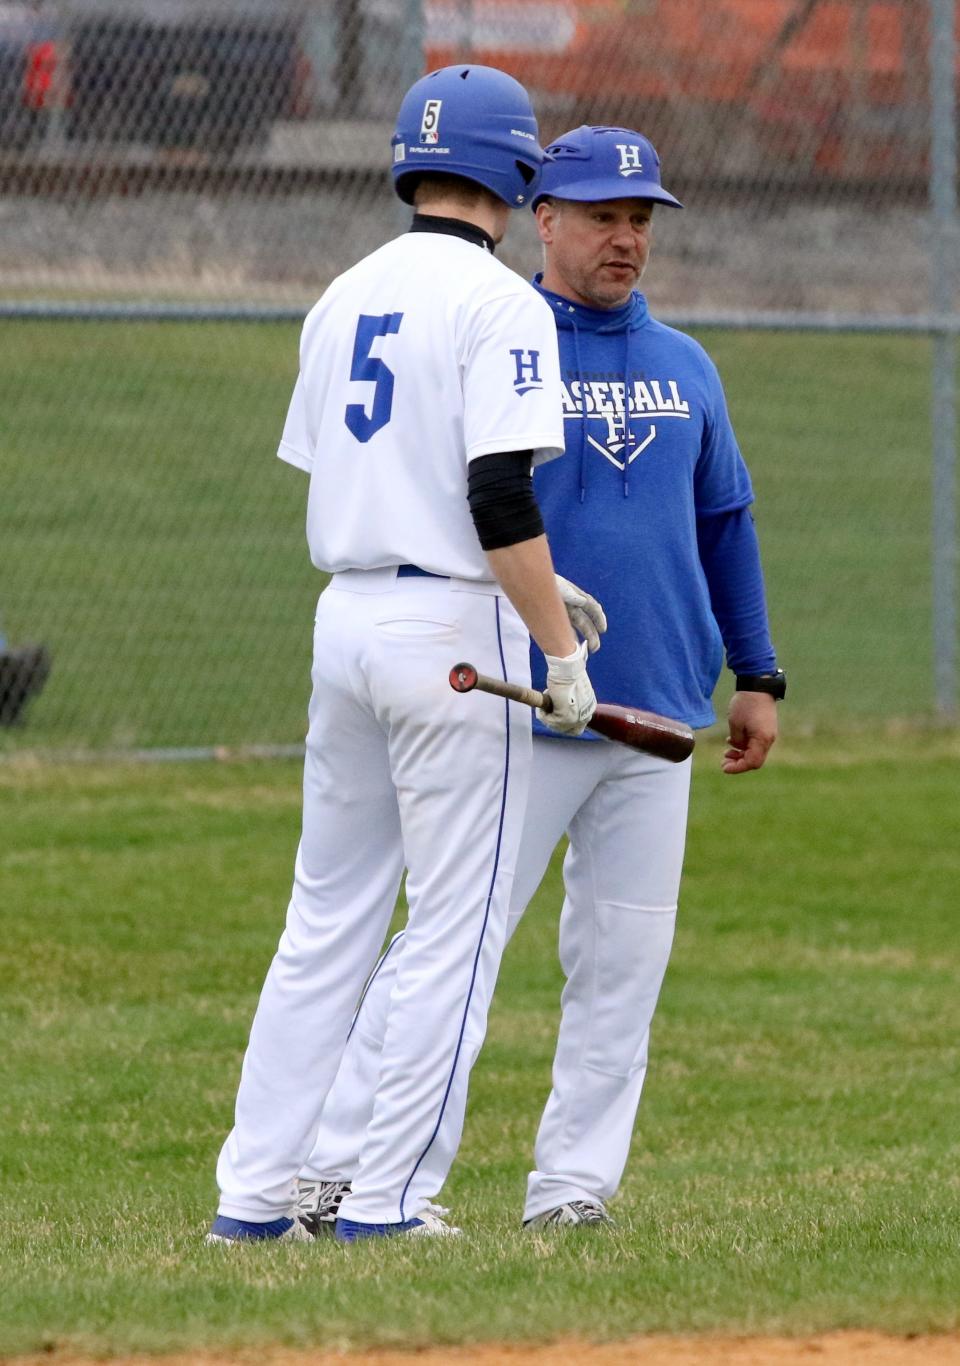 Horseheads head coach Jeff Limoncelli talks with Dylan Ribble during the Blue Raiders' 4-1 win over Union-Endicott in baseball April 6, 2022 at Horseheads High School.